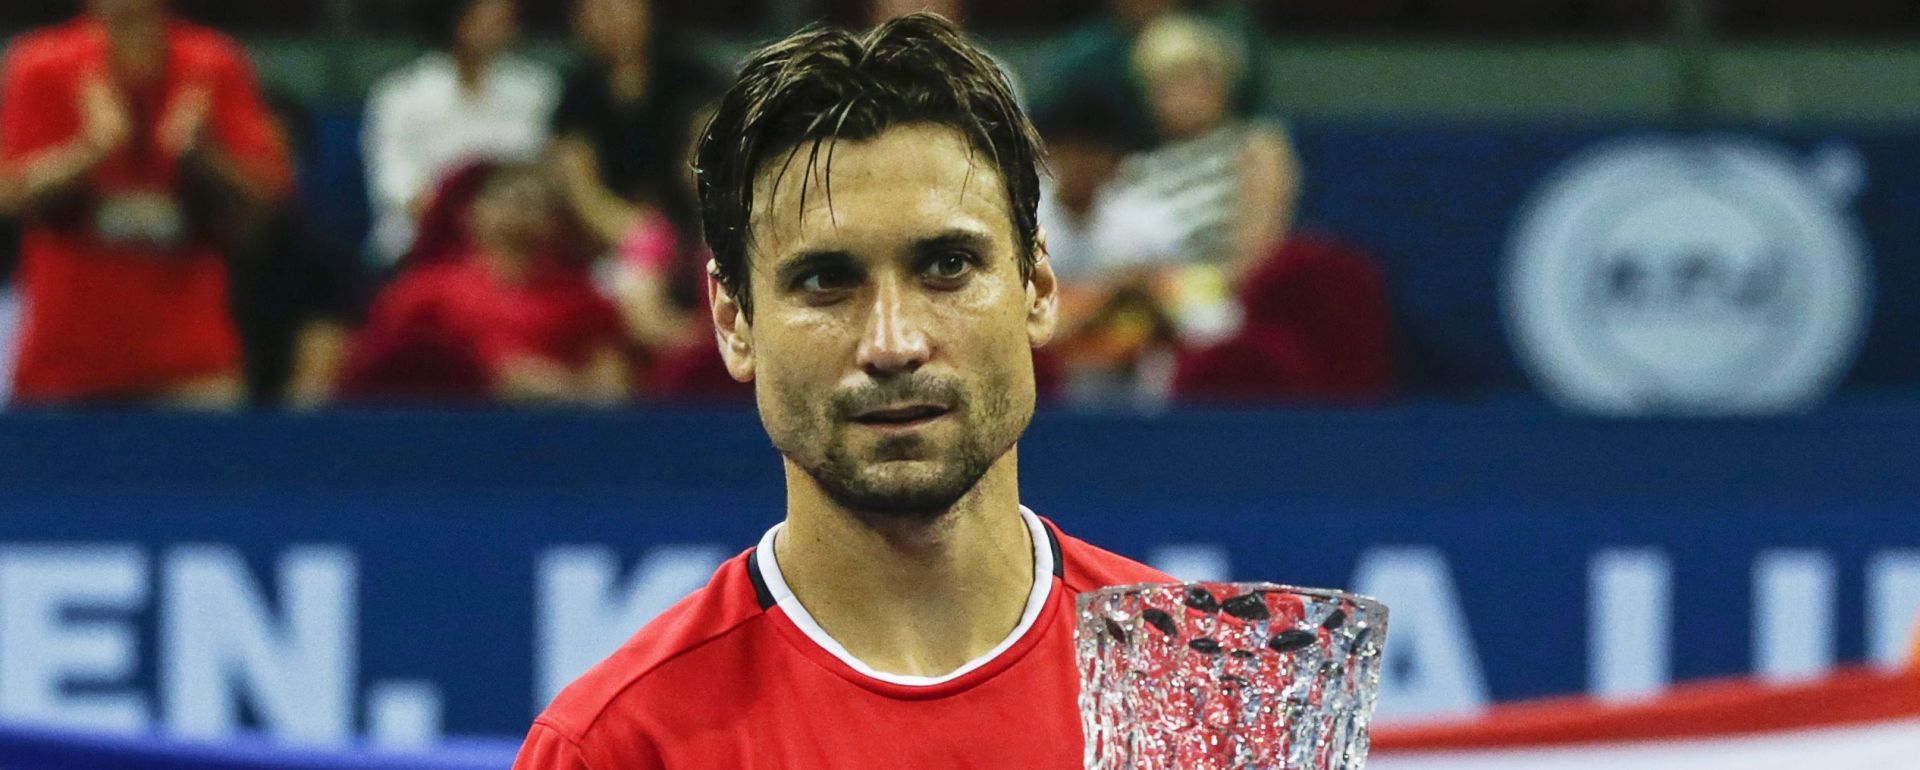 epa04962608 David Ferrer of Spain poses with his trophy after beating his compatriot Feliciano Lopez in their final match of the ATP Malaysian Open tennis tournament in Kuala Lumpur, Malaysia, 04 October 2015. Ferrer won 7-5 and 7-5.  EPA/FAZRY ISMAIL